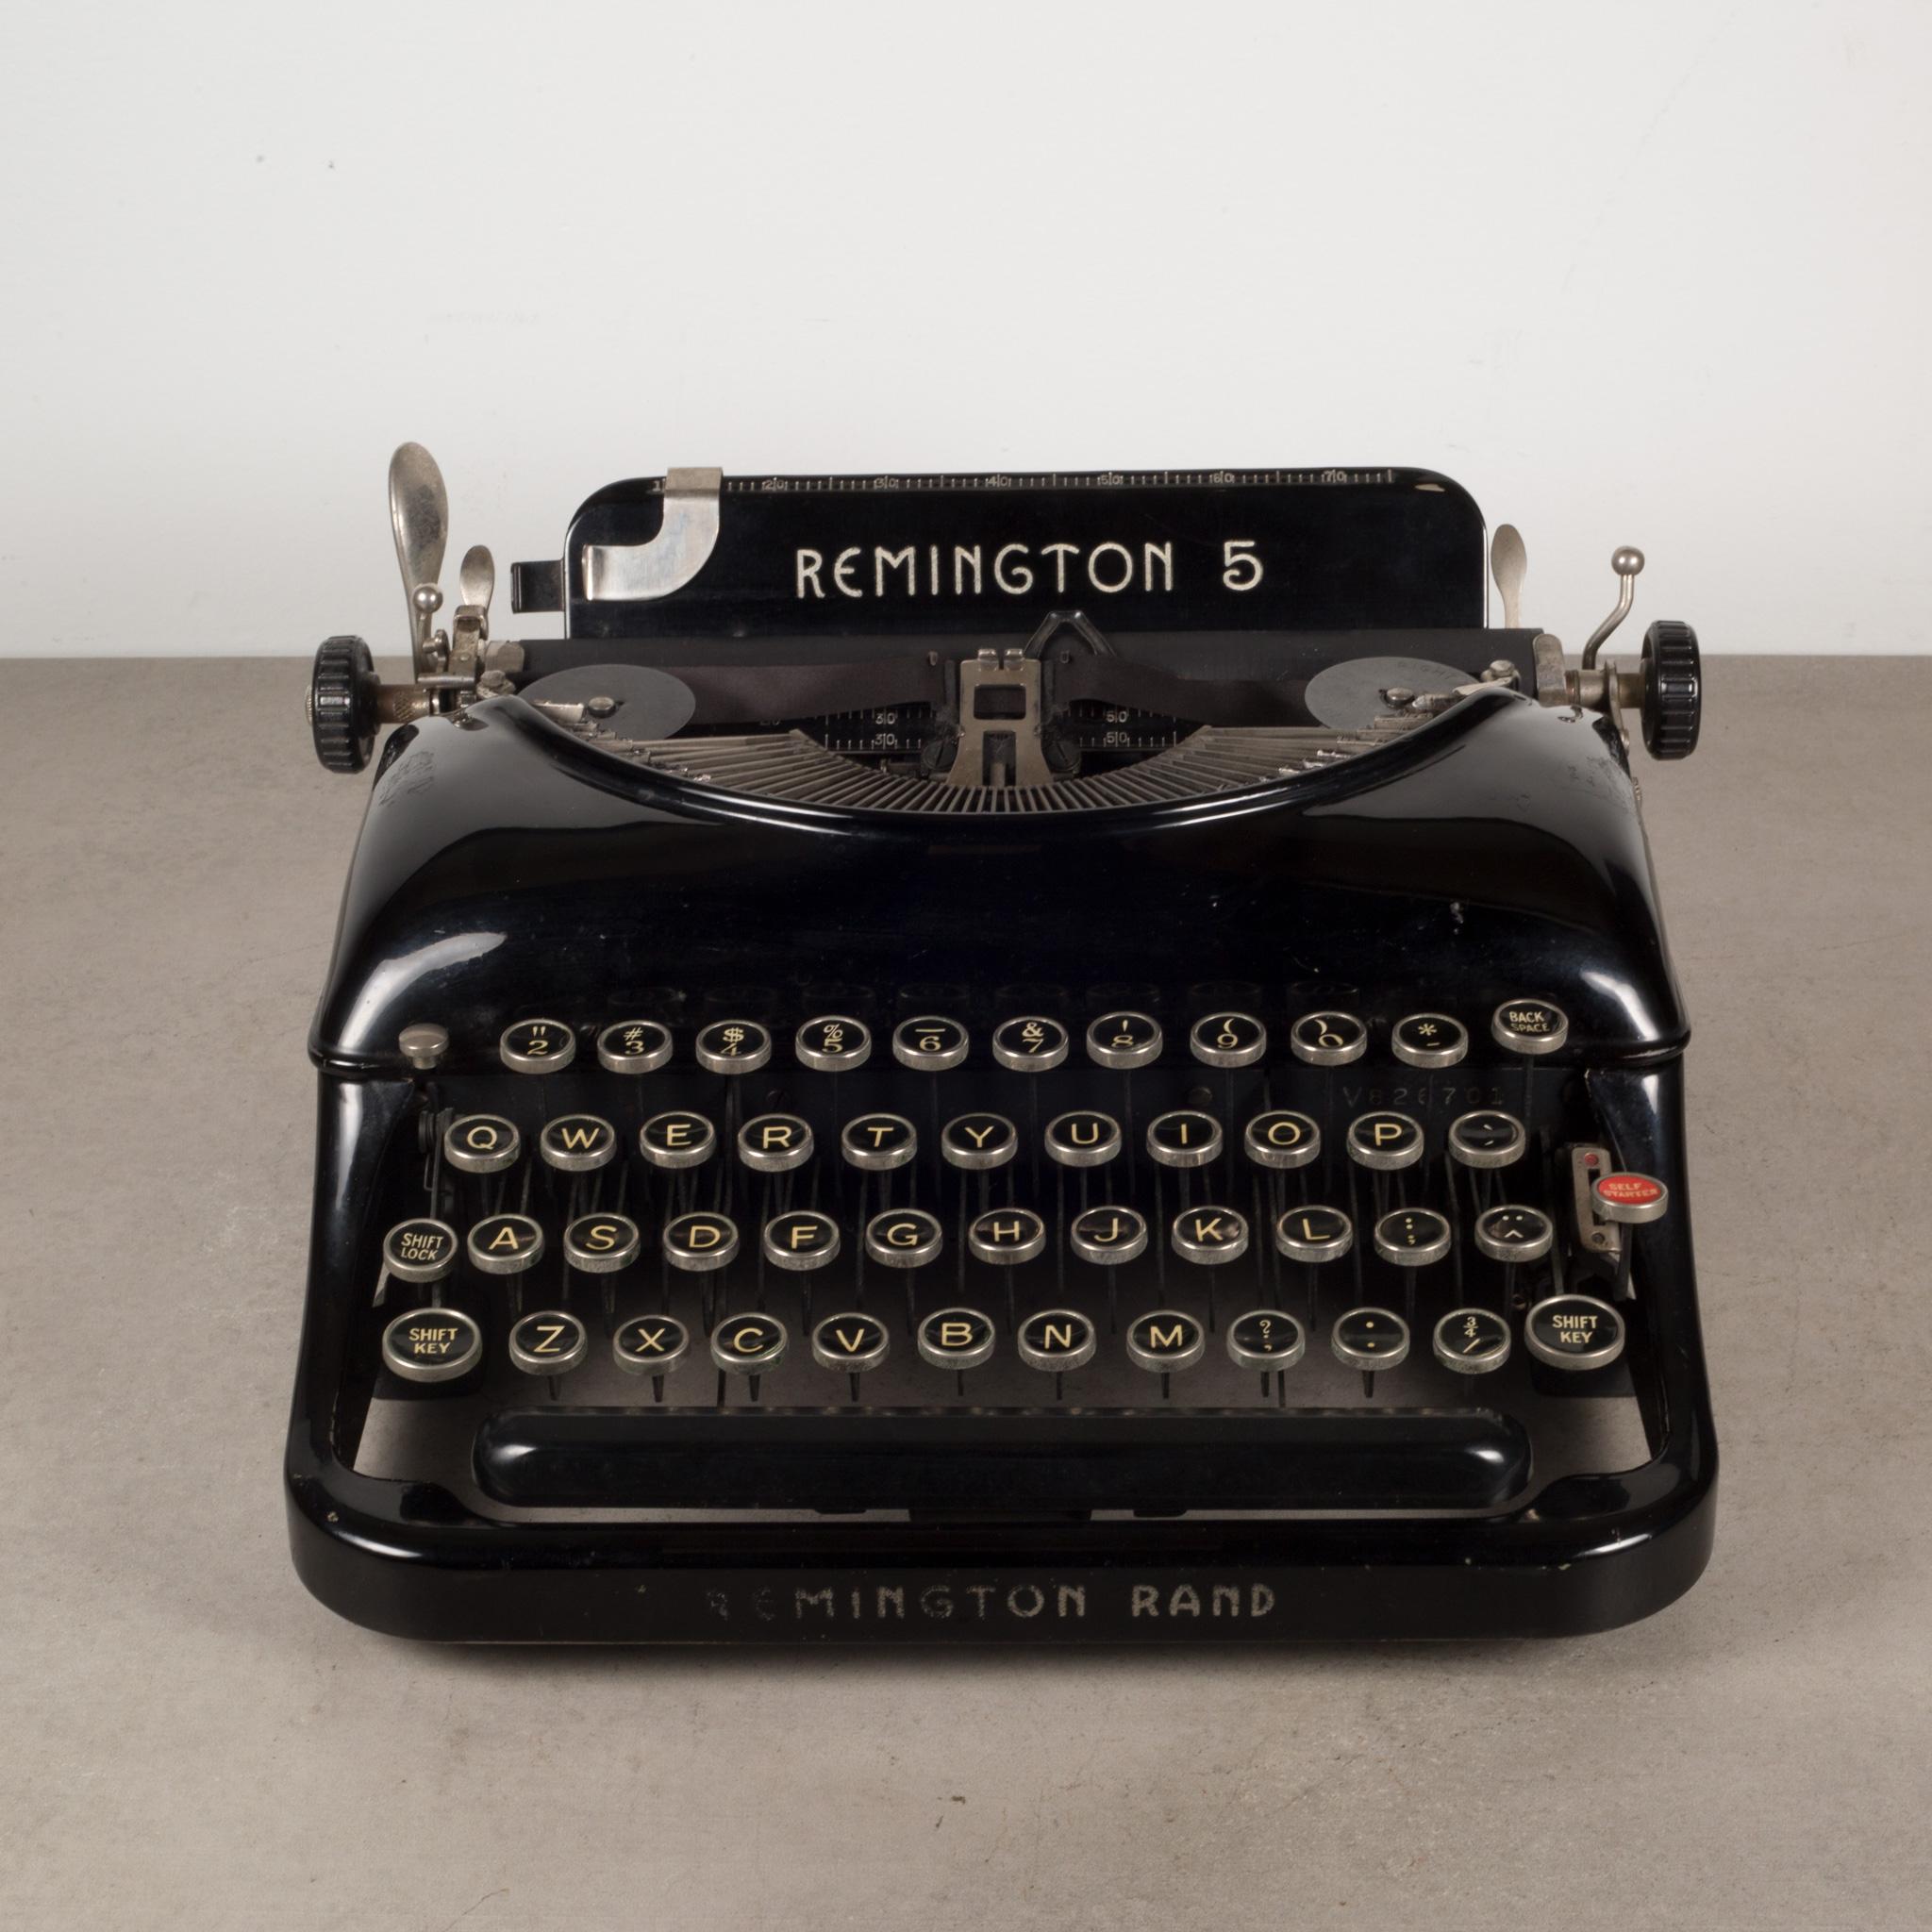 ABOUT

An original Remington Rand 5 Typewriter with original case. The keys are nickle with black with white letters. This typewriter is very clean and has been fully refurbished. It has smooth typing and the carriage advances and functions very